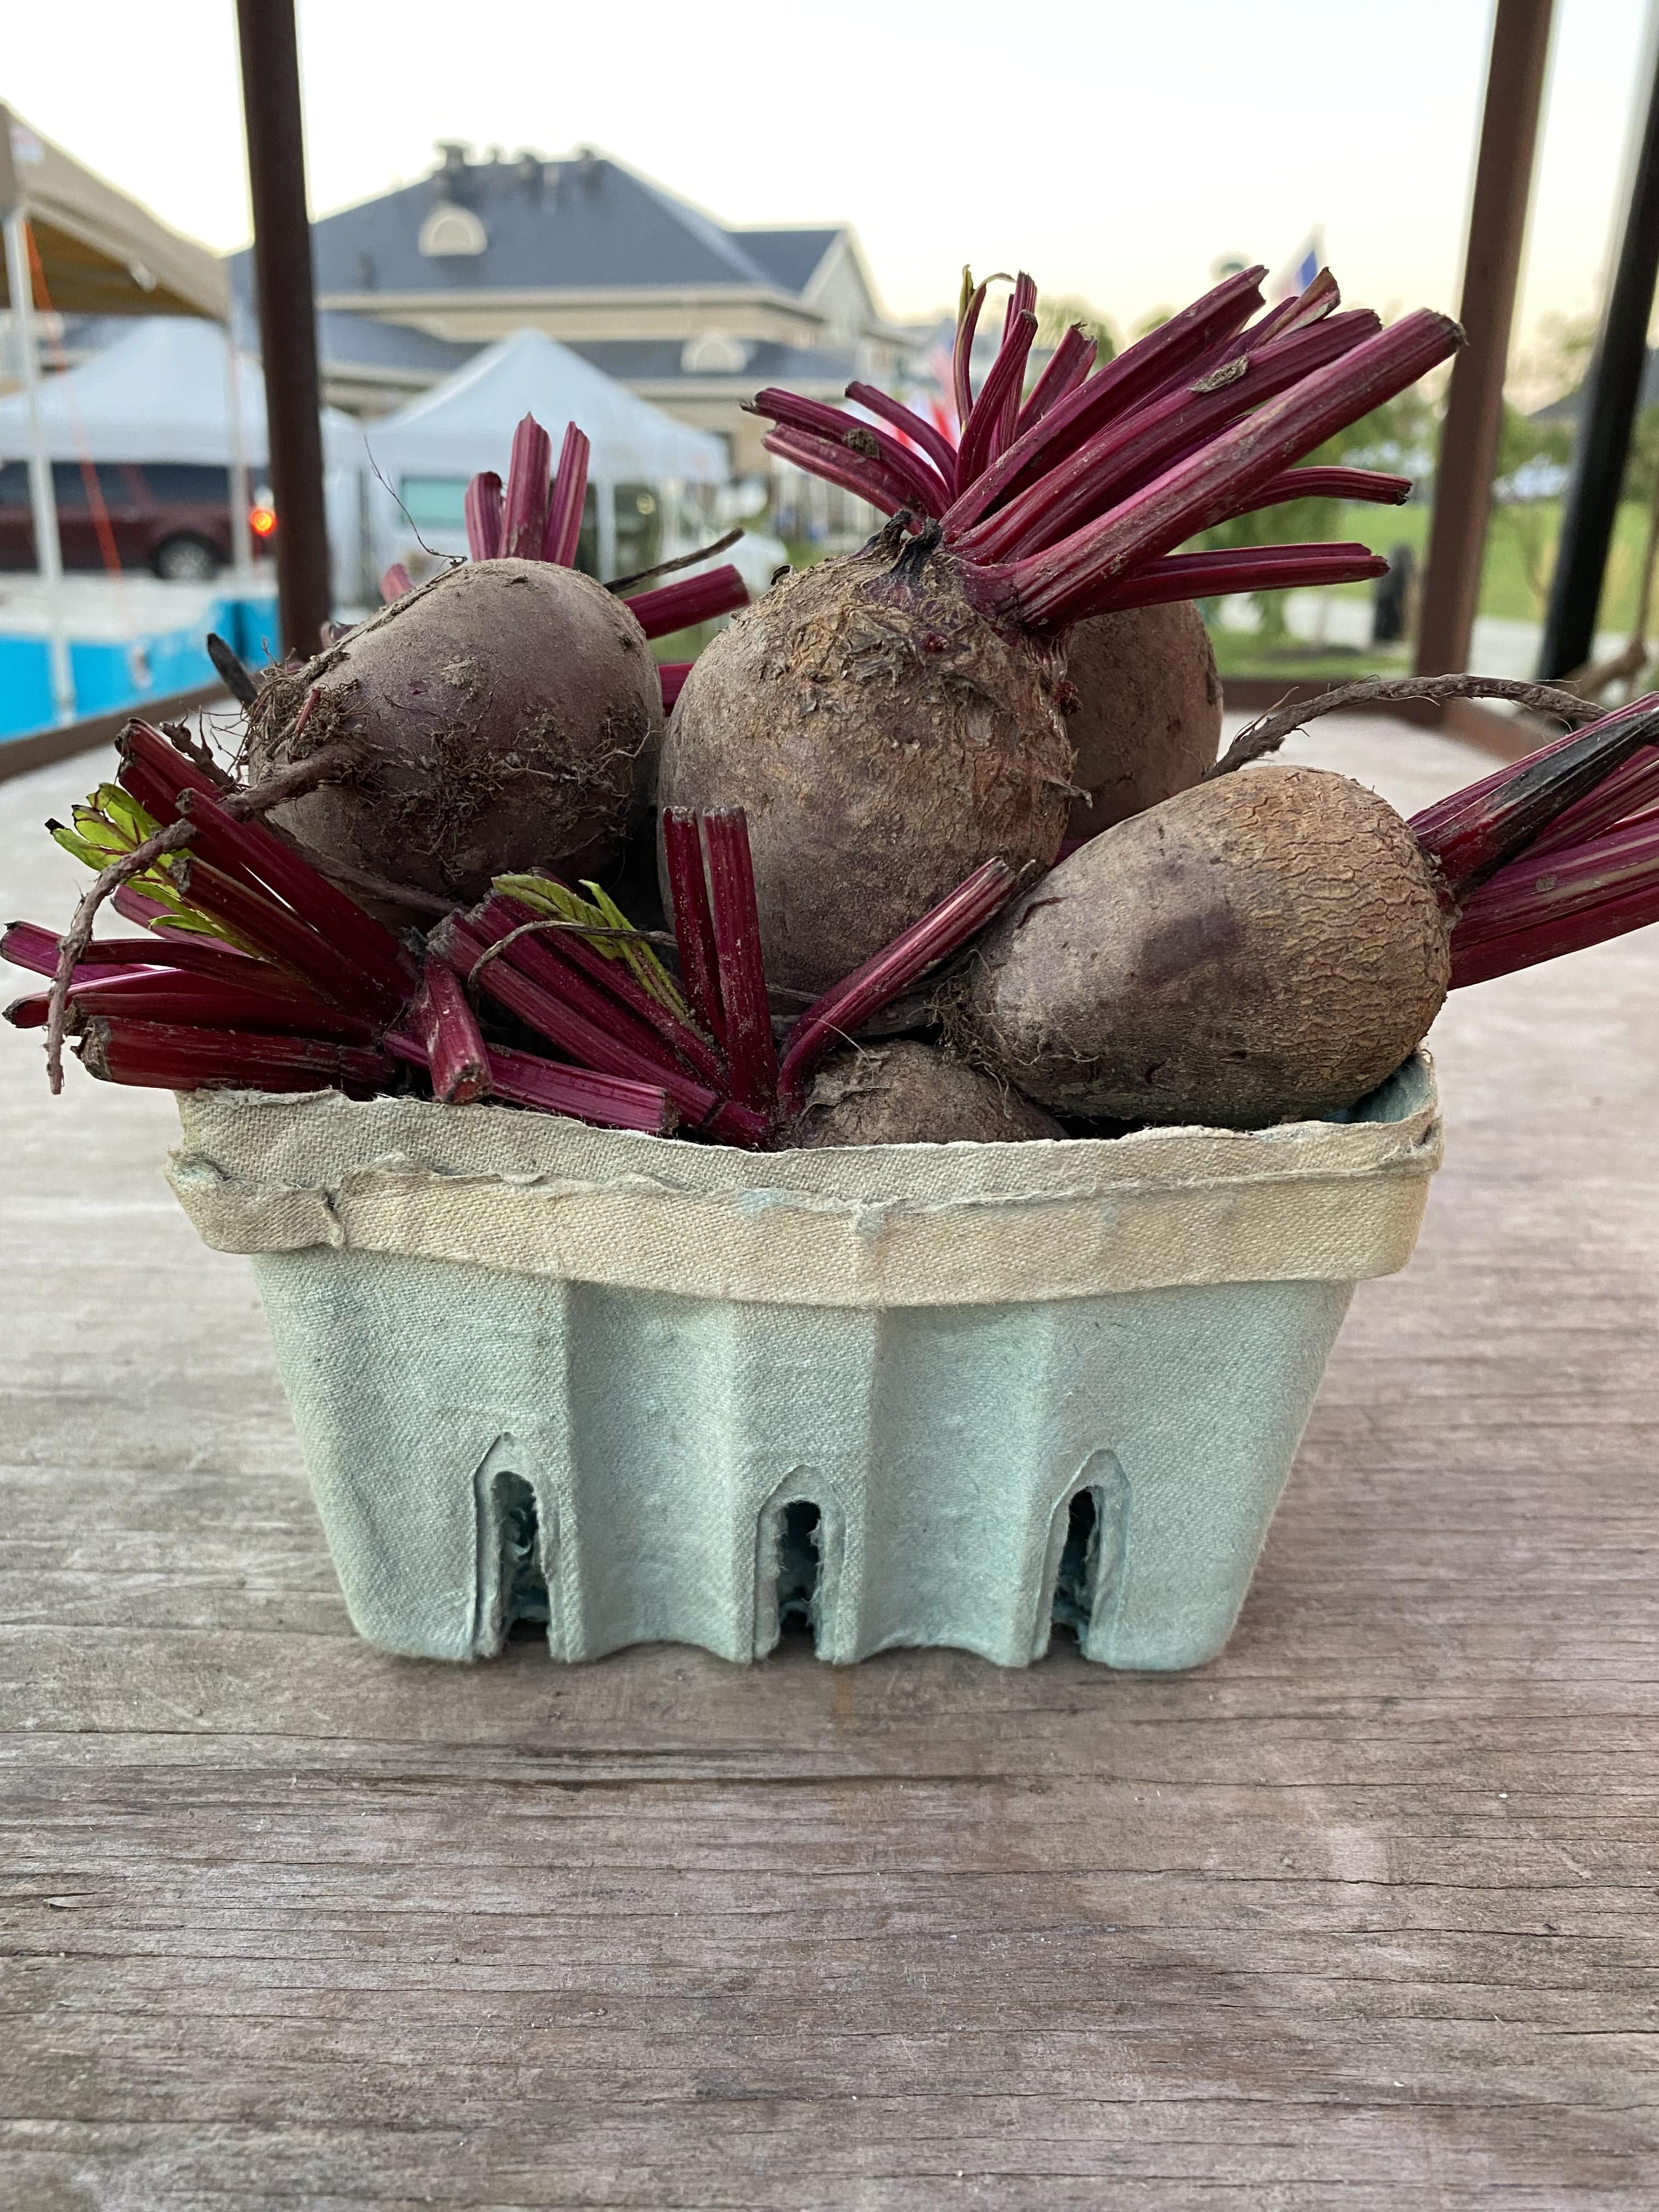 Beets Image